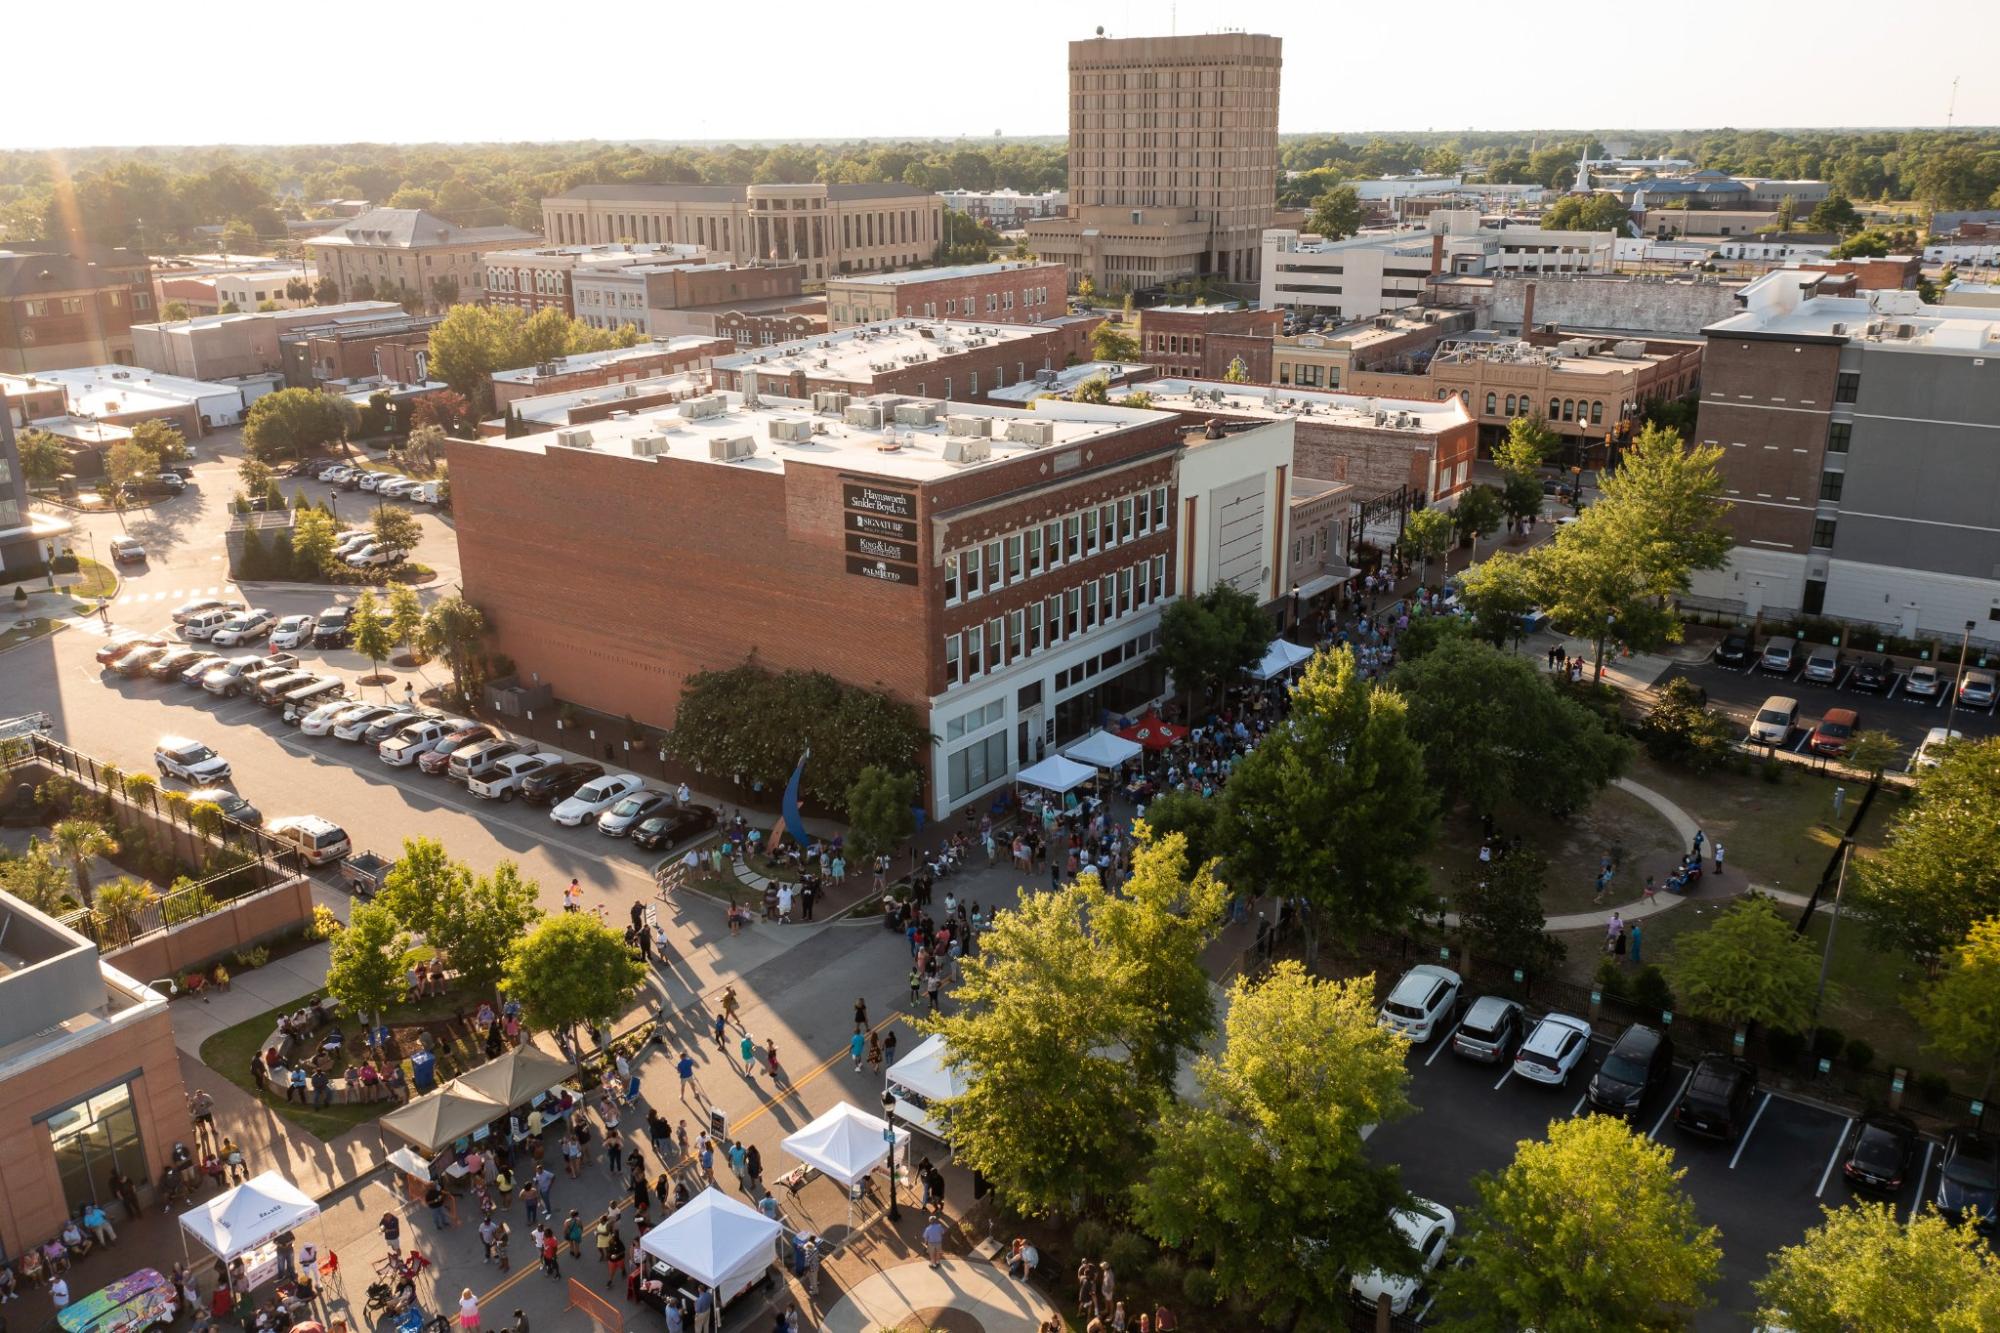 Downtown Florence is home to events like the Florence After 5 concert series. Photo: True Light Photography.